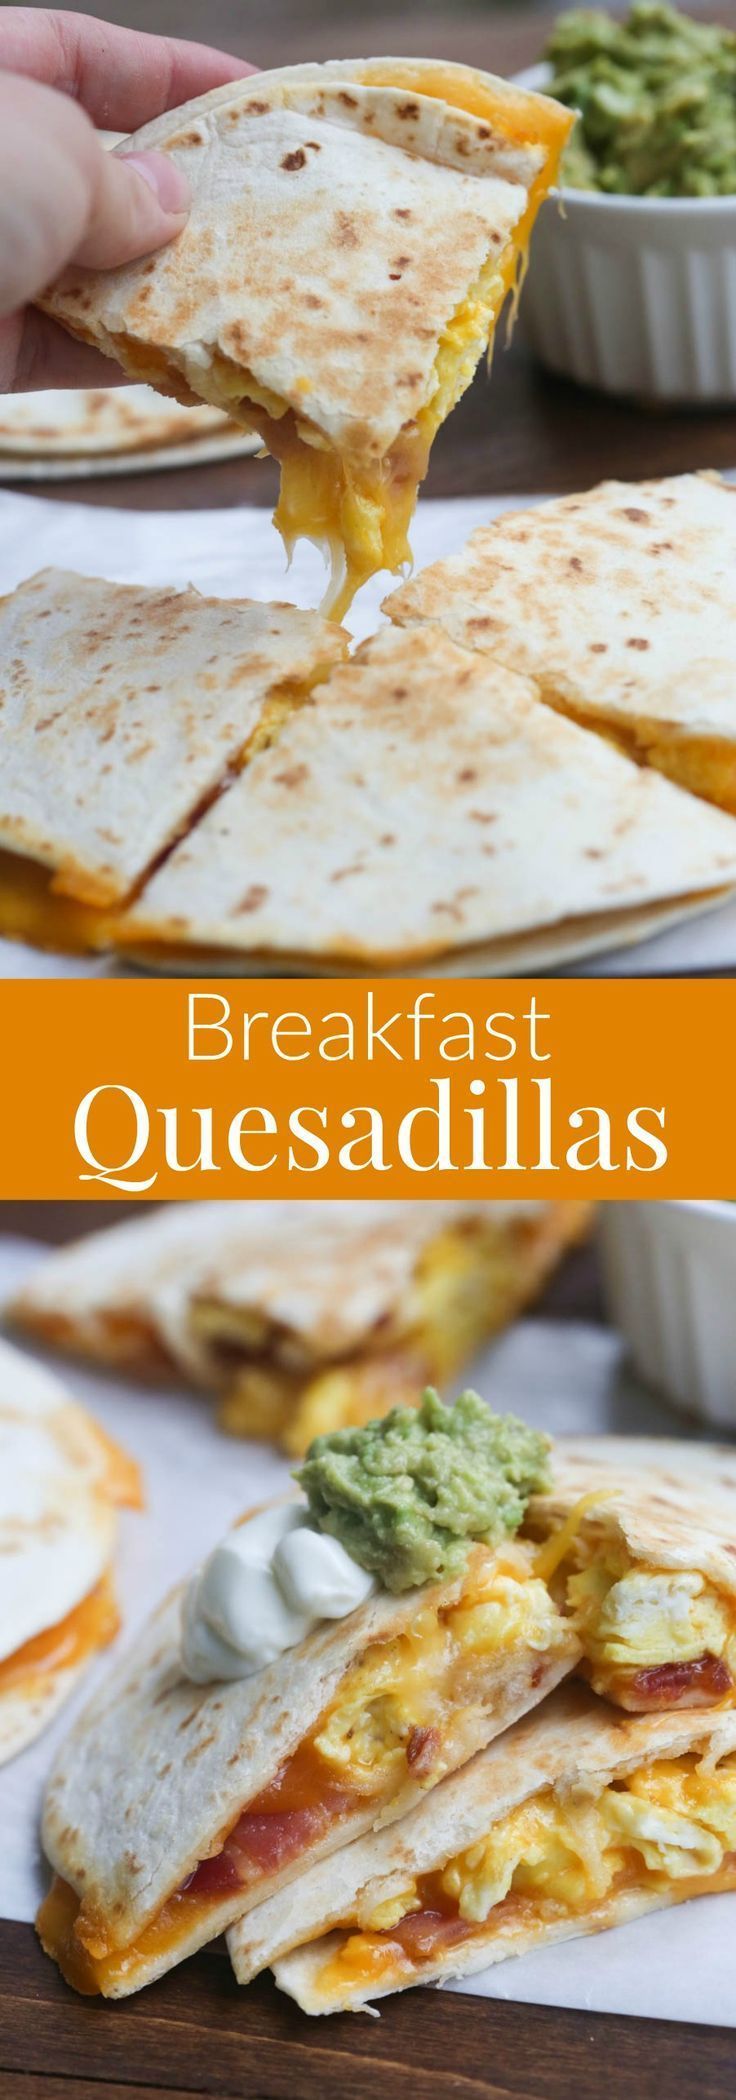 Breakfast Quesadillas with bacon, egg and cheese. An easy breakfast or dinner idea the family is sure to LOVE! | Tastes Better